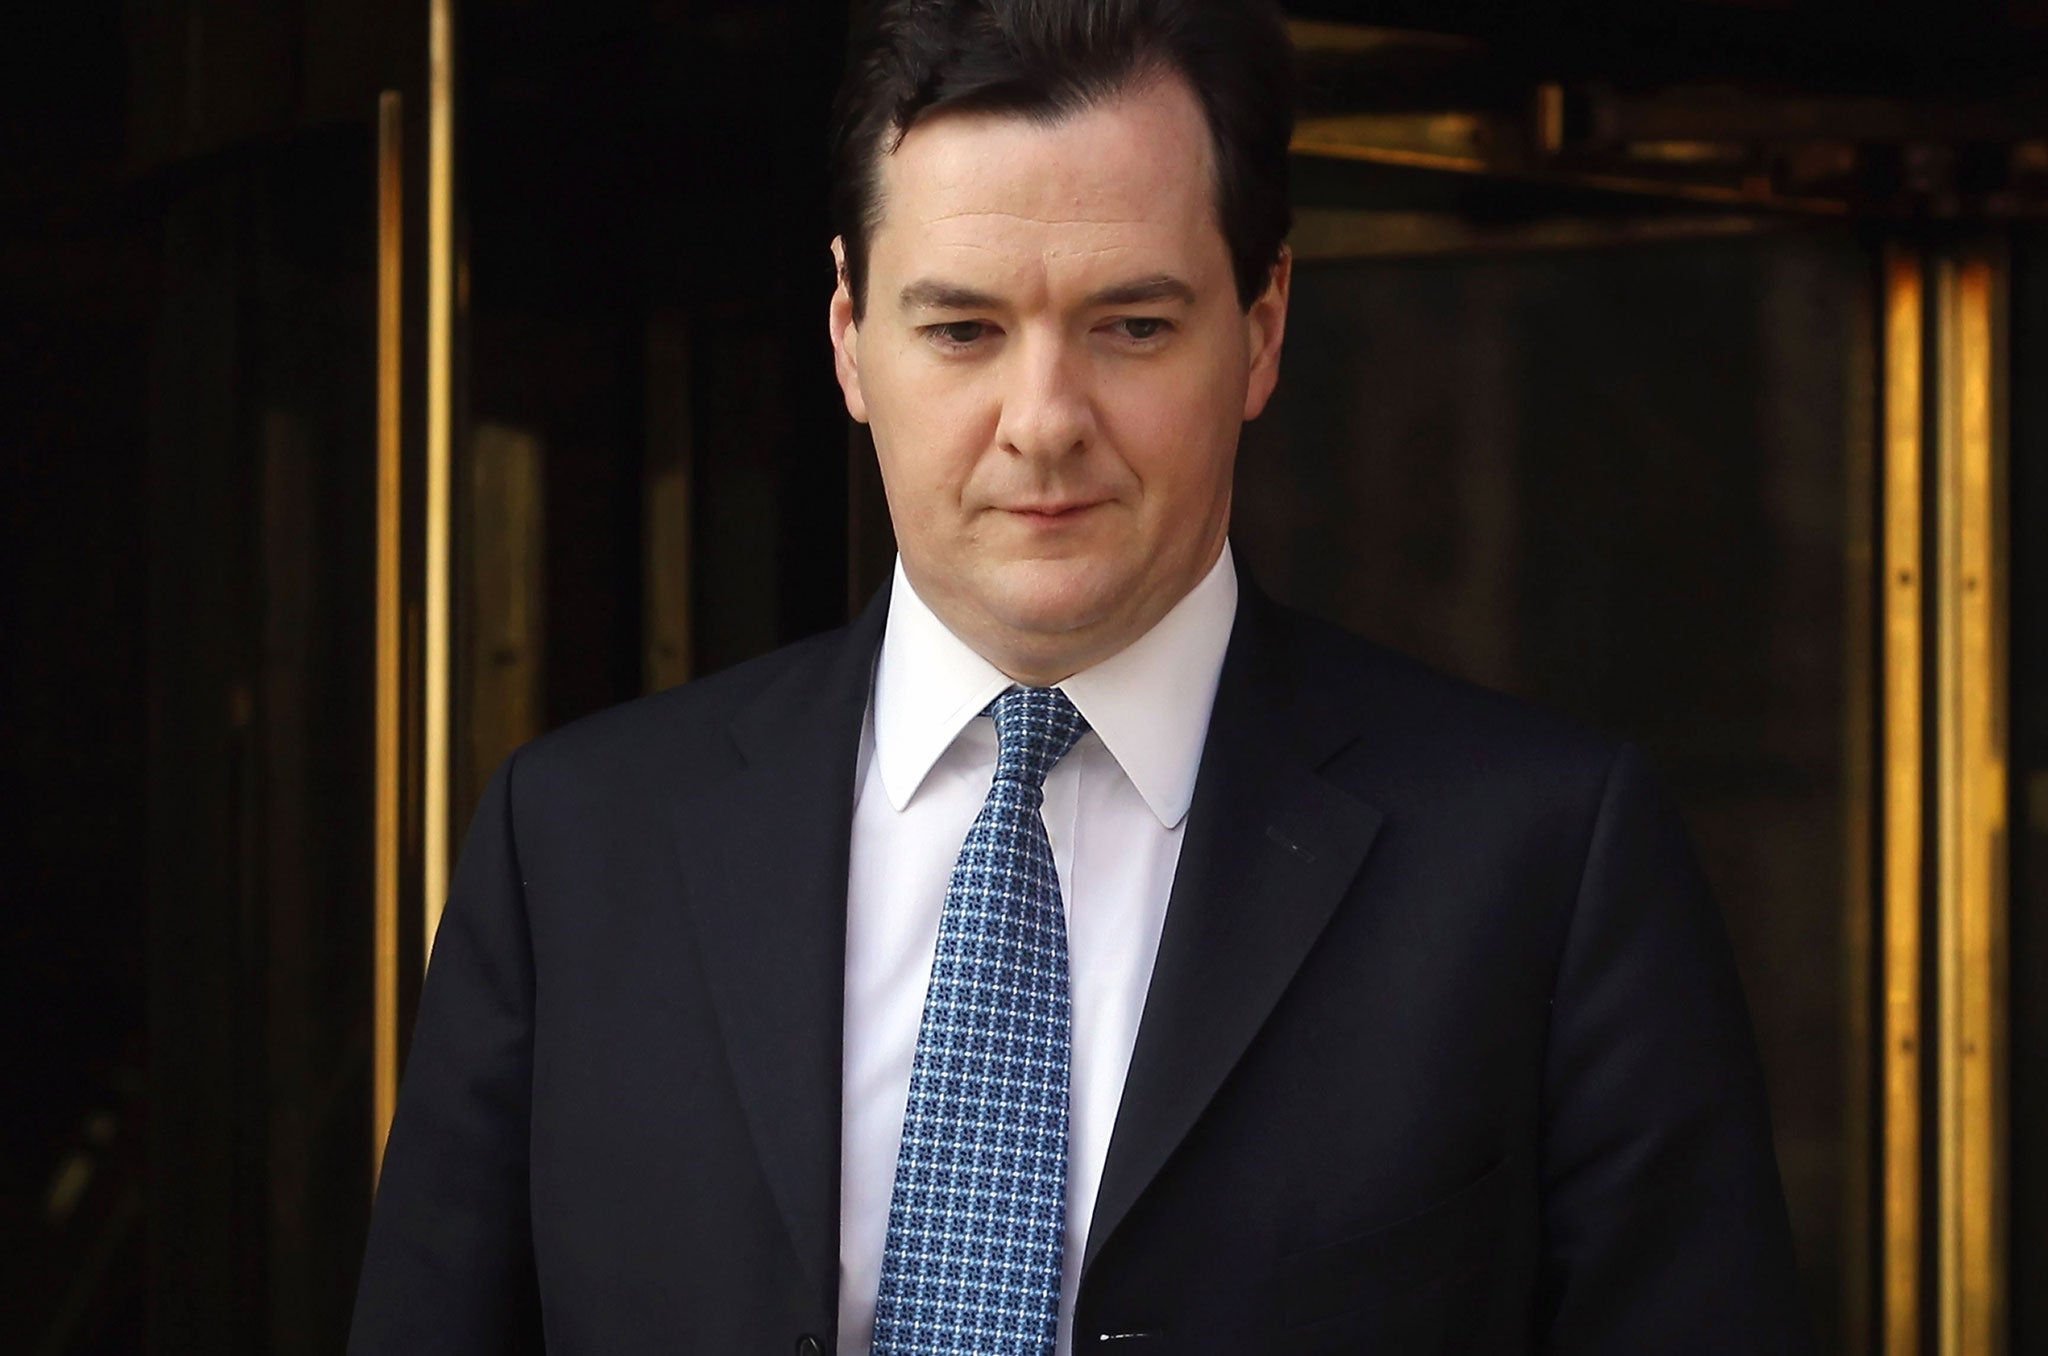 Chancellor of the Exchequer George Osborne leaves Millbank studios after a series of radio interviews on March 22, 2012 in London, England.